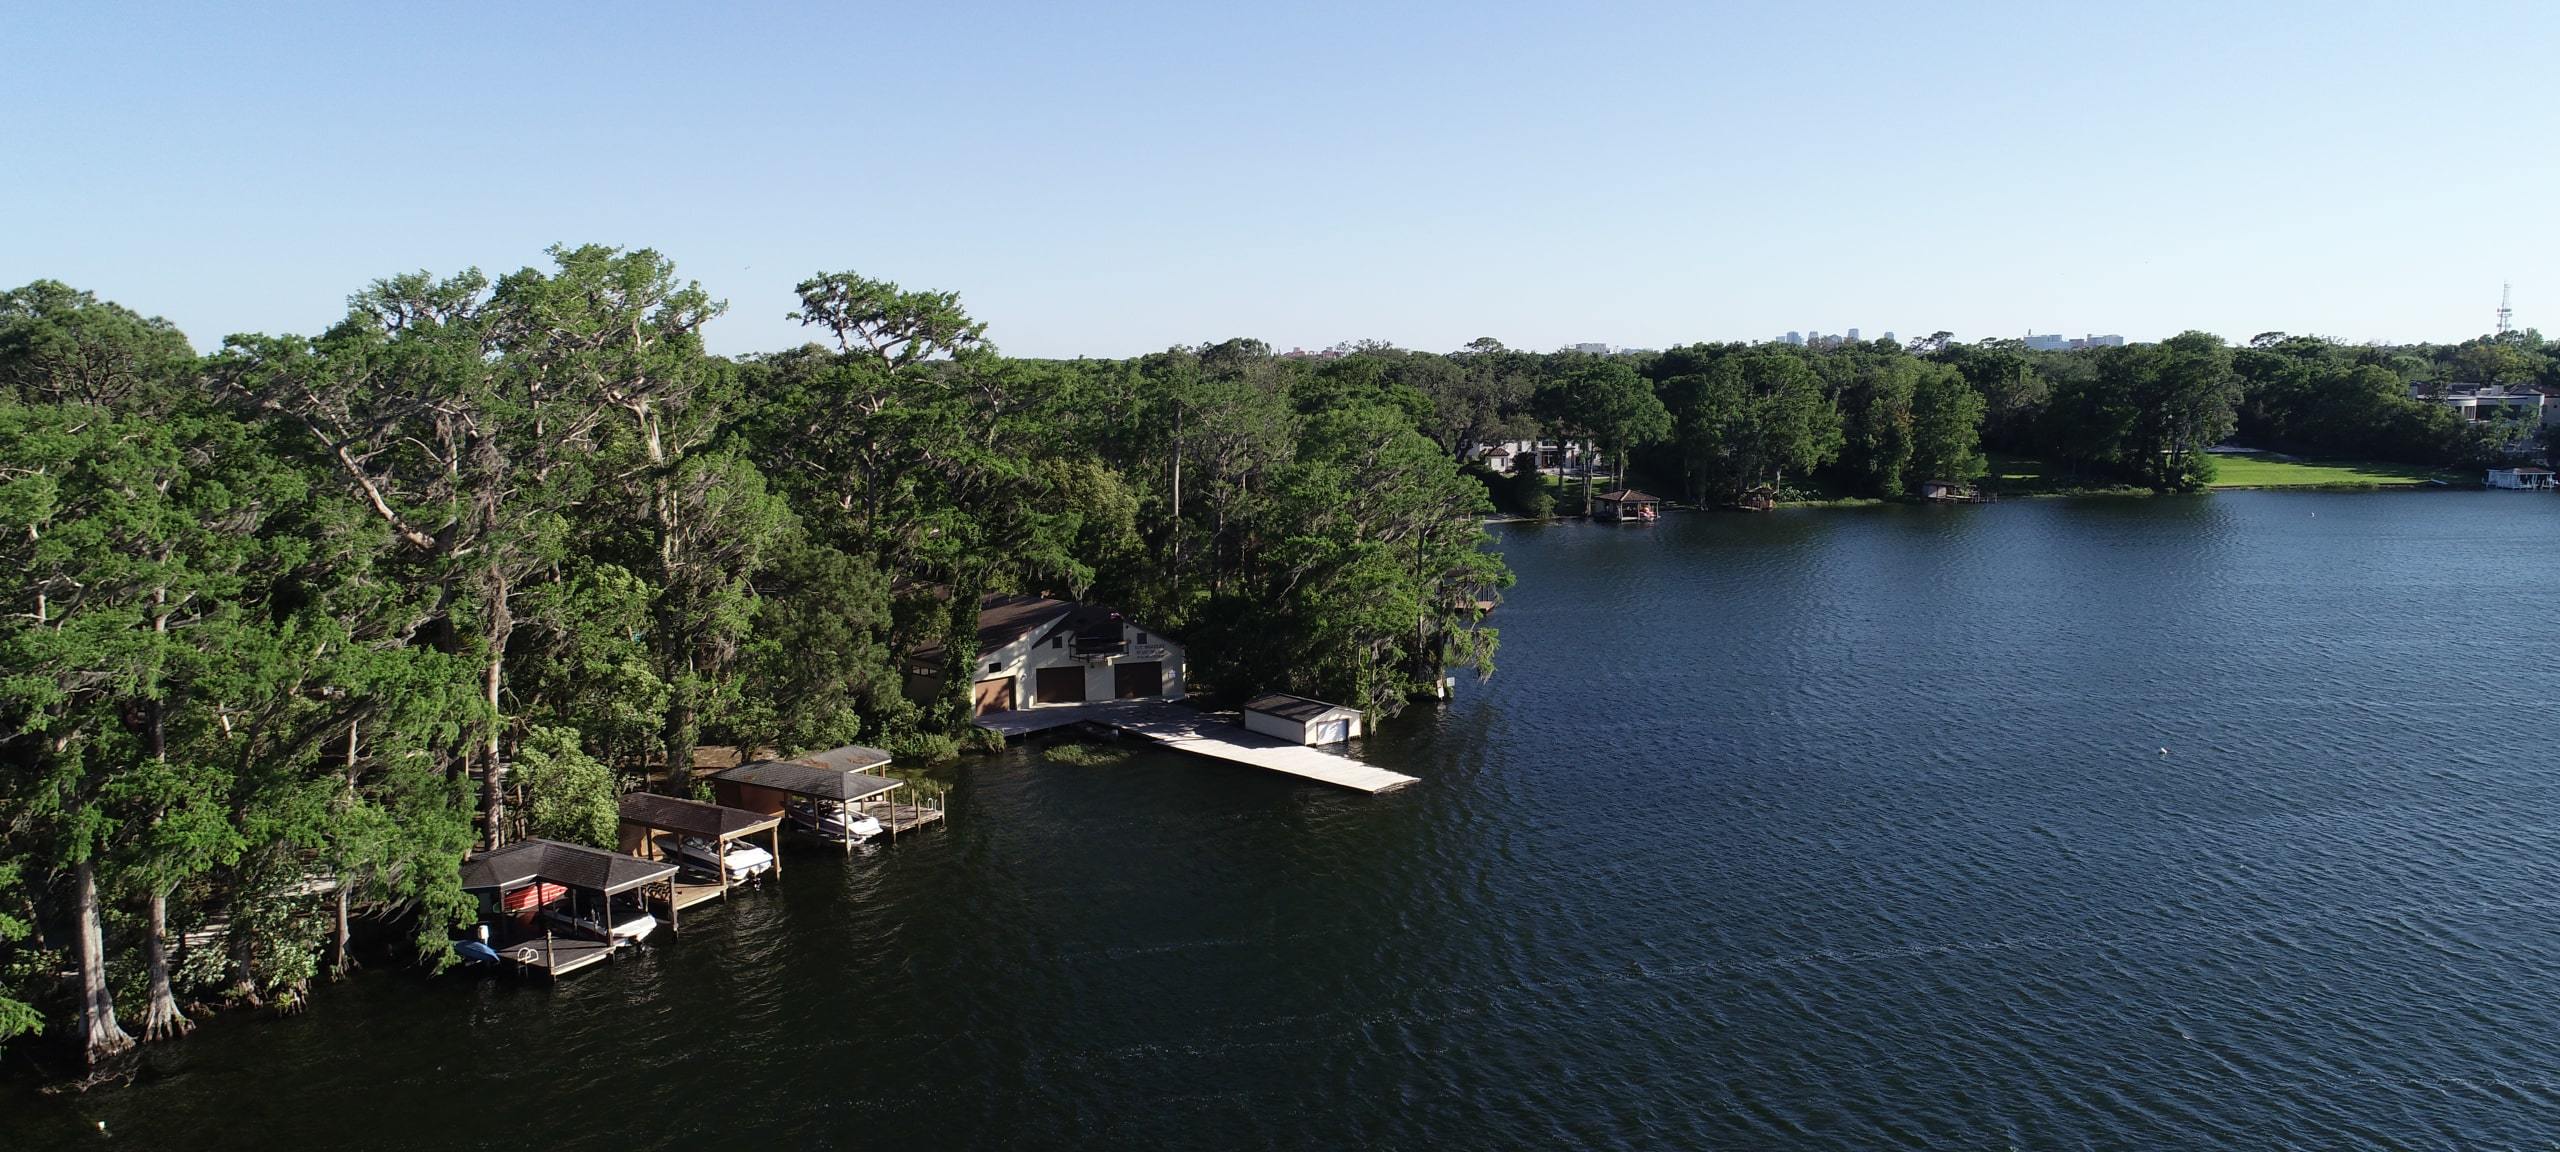 Homes on the lakefront, typical of the area around Horizon West, FL